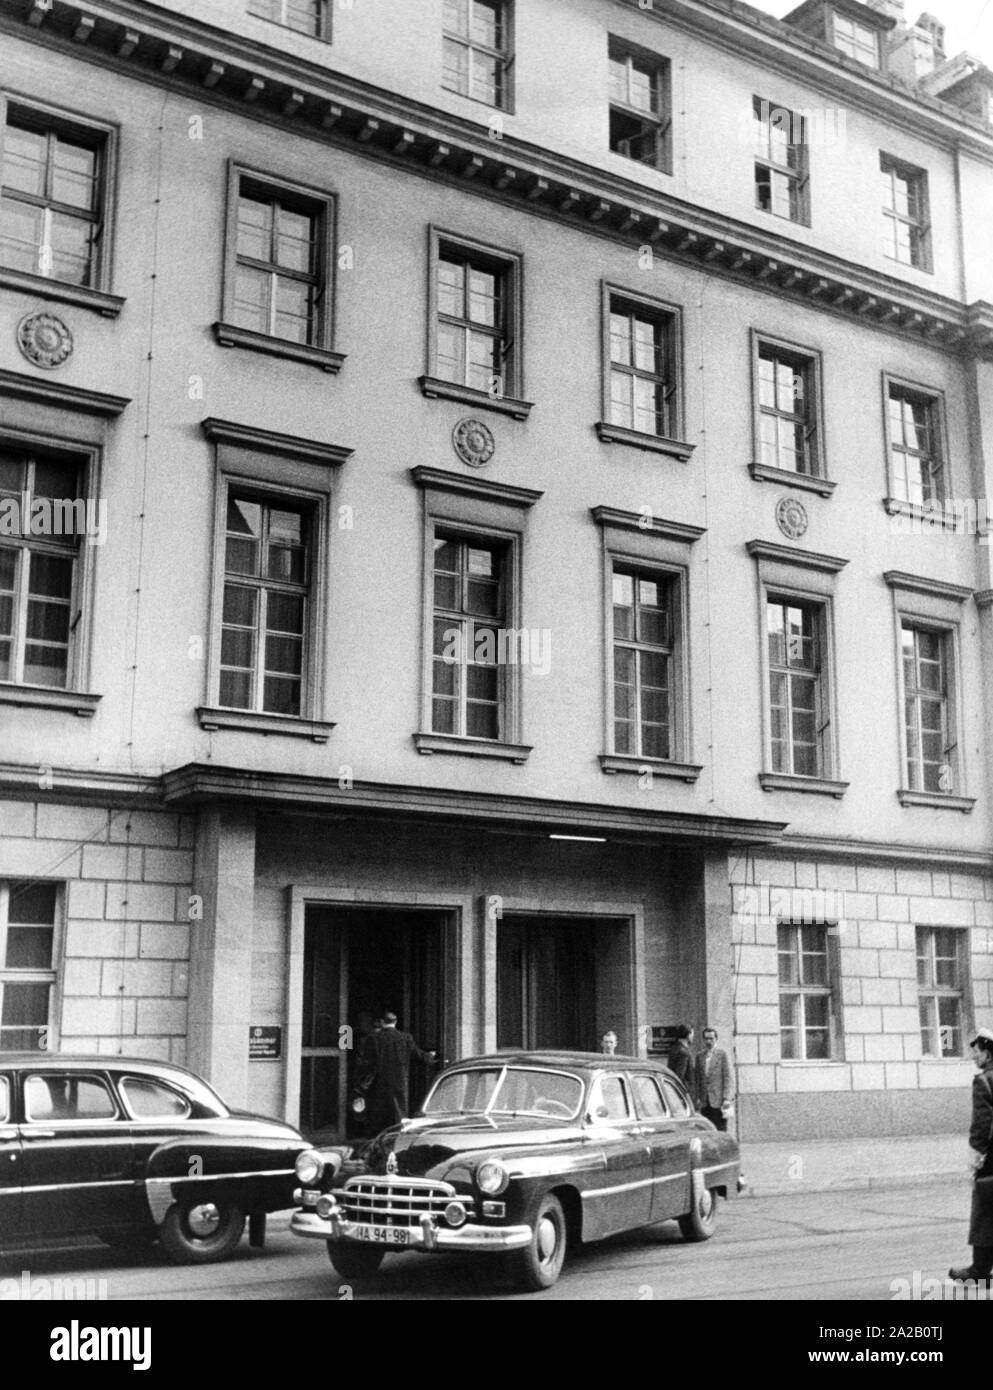 The picture shows the Langenbeck-Virchow-Haus in Luisenstrasse in Berlin. After the expropriation by the GDR in 1953, this building became the seat of the People's Chamber, the highest constitutional body of the GDR. In 1976, the People's Chamber finally moved to the Palace of the Republic and the building went to the Academy of Arts. The picture shows how members of the People's Chamber are entering the building. Two service cars stand in front of the building. Stock Photo